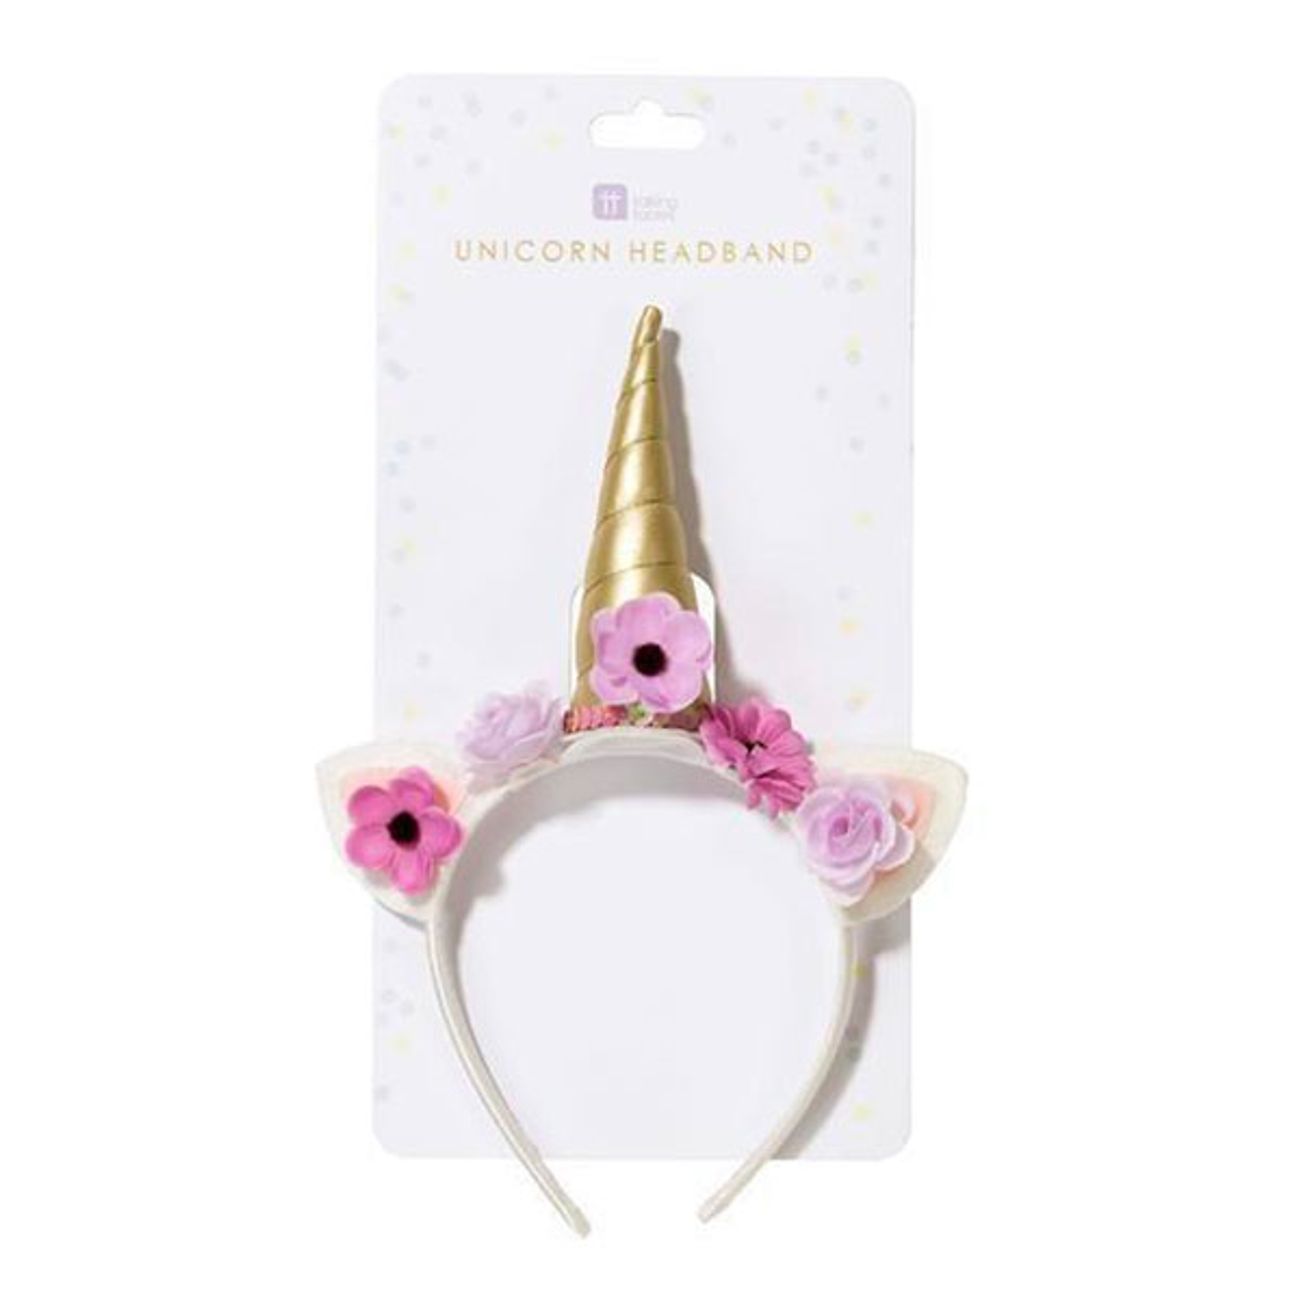 we-heart-unicorns-headband-with-gold-horns-and-flowers-1